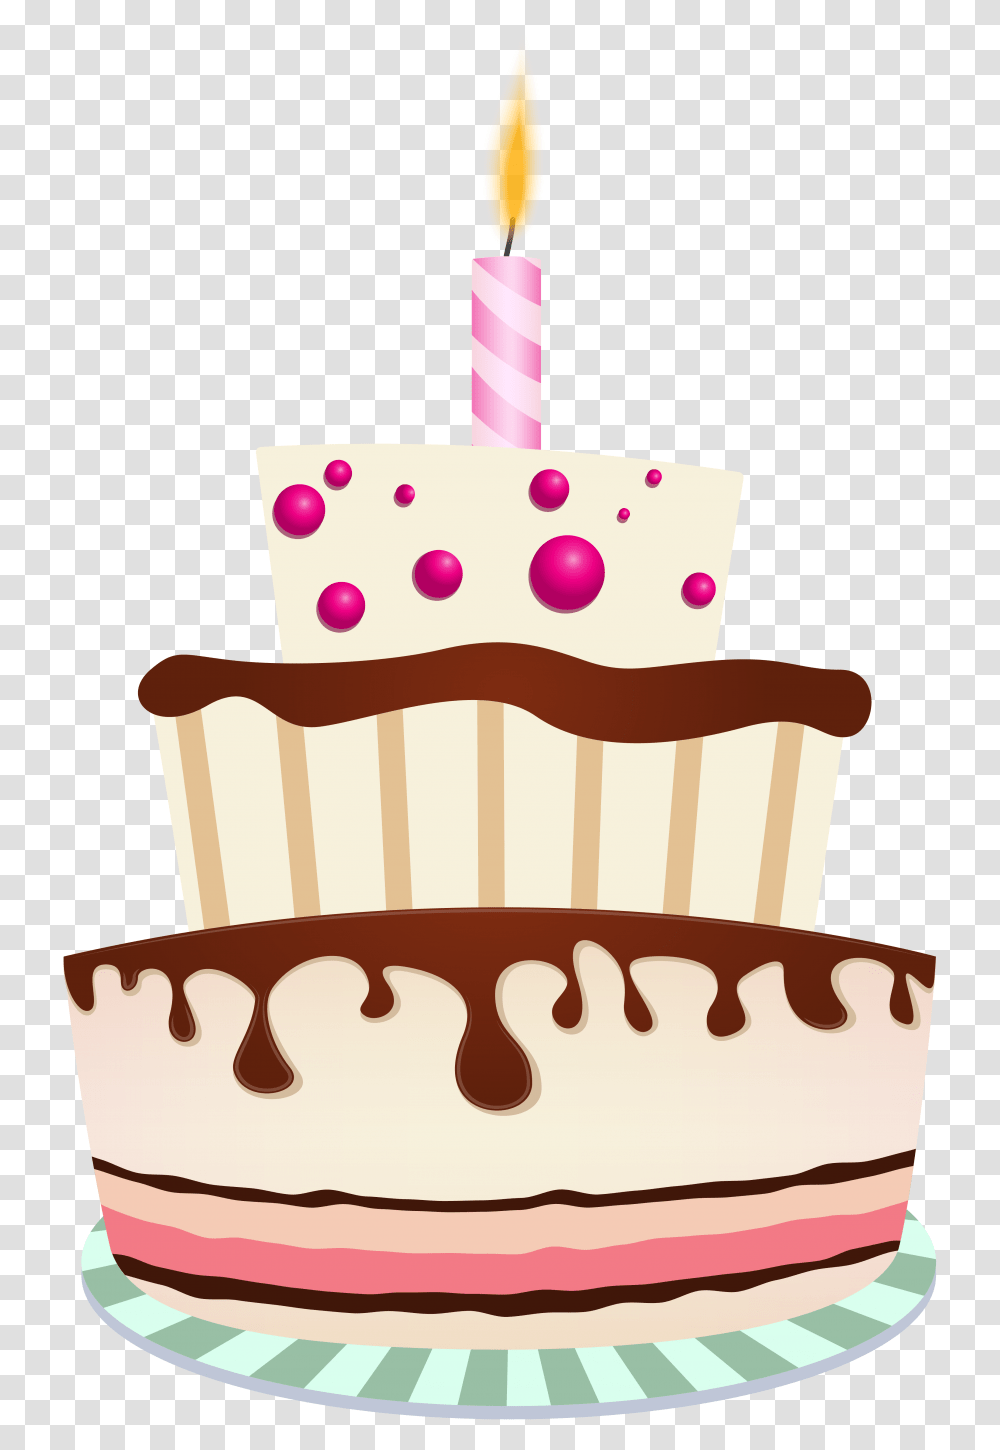 Birthday Cakes Cake With One Candle Cake And Candle, Cupcake, Cream, Dessert, Food Transparent Png